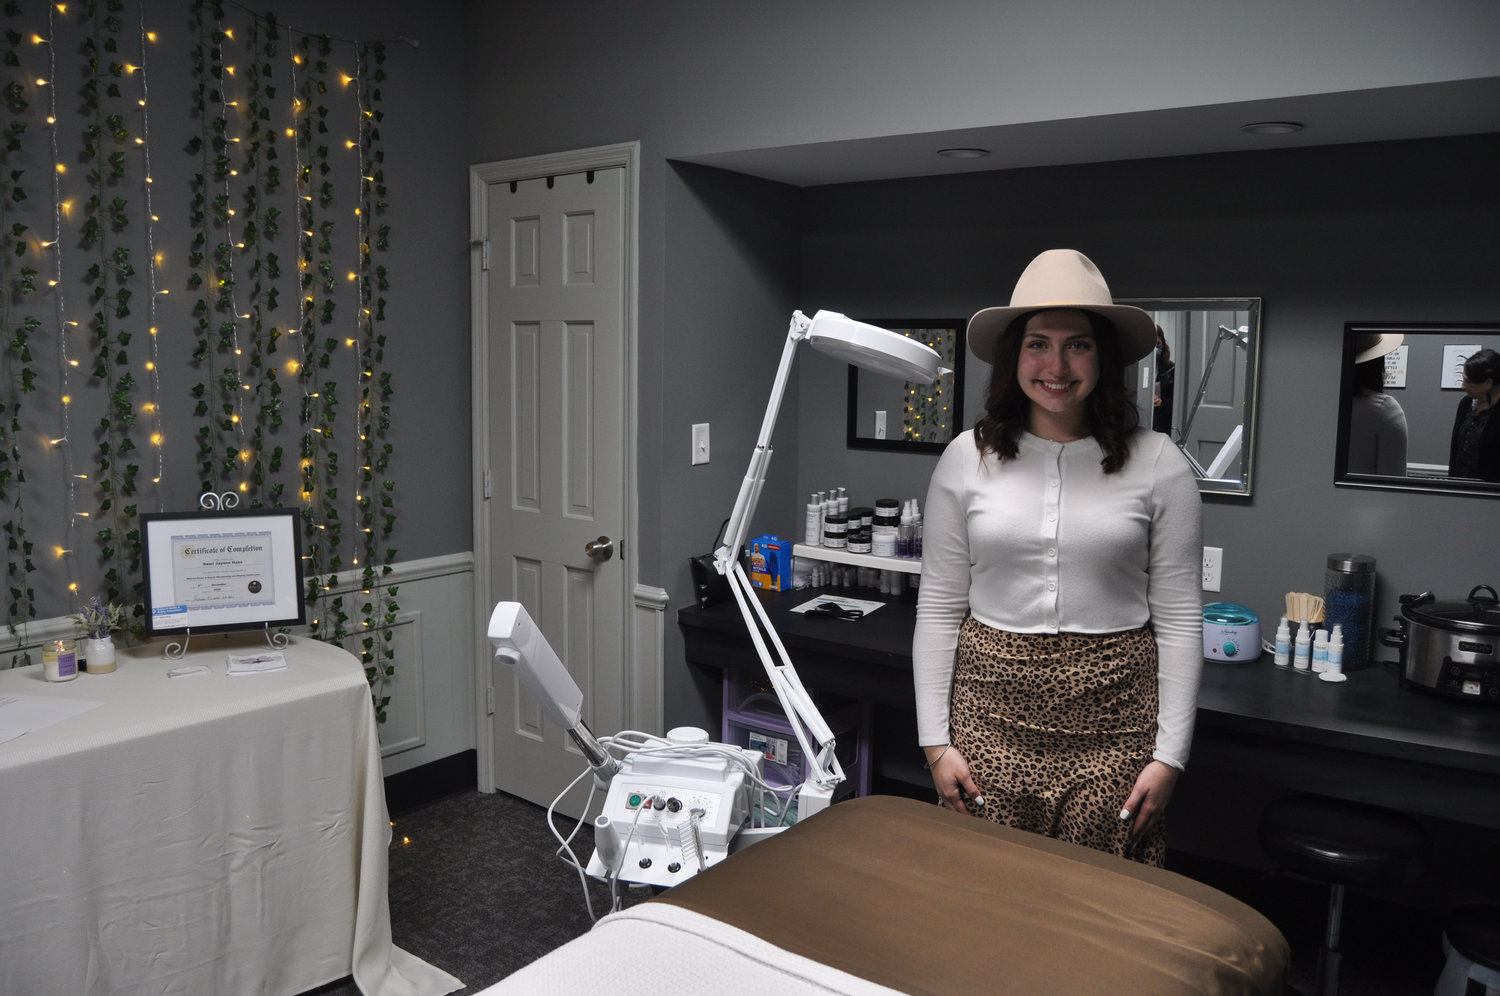 Demi Haas stands in her business djh esthetics and brows in the Weemickle Building in downtown Crawfordsville. Haas shares the space with Lilly Wallace’s women’s fashion store, Maive’s Boutique.